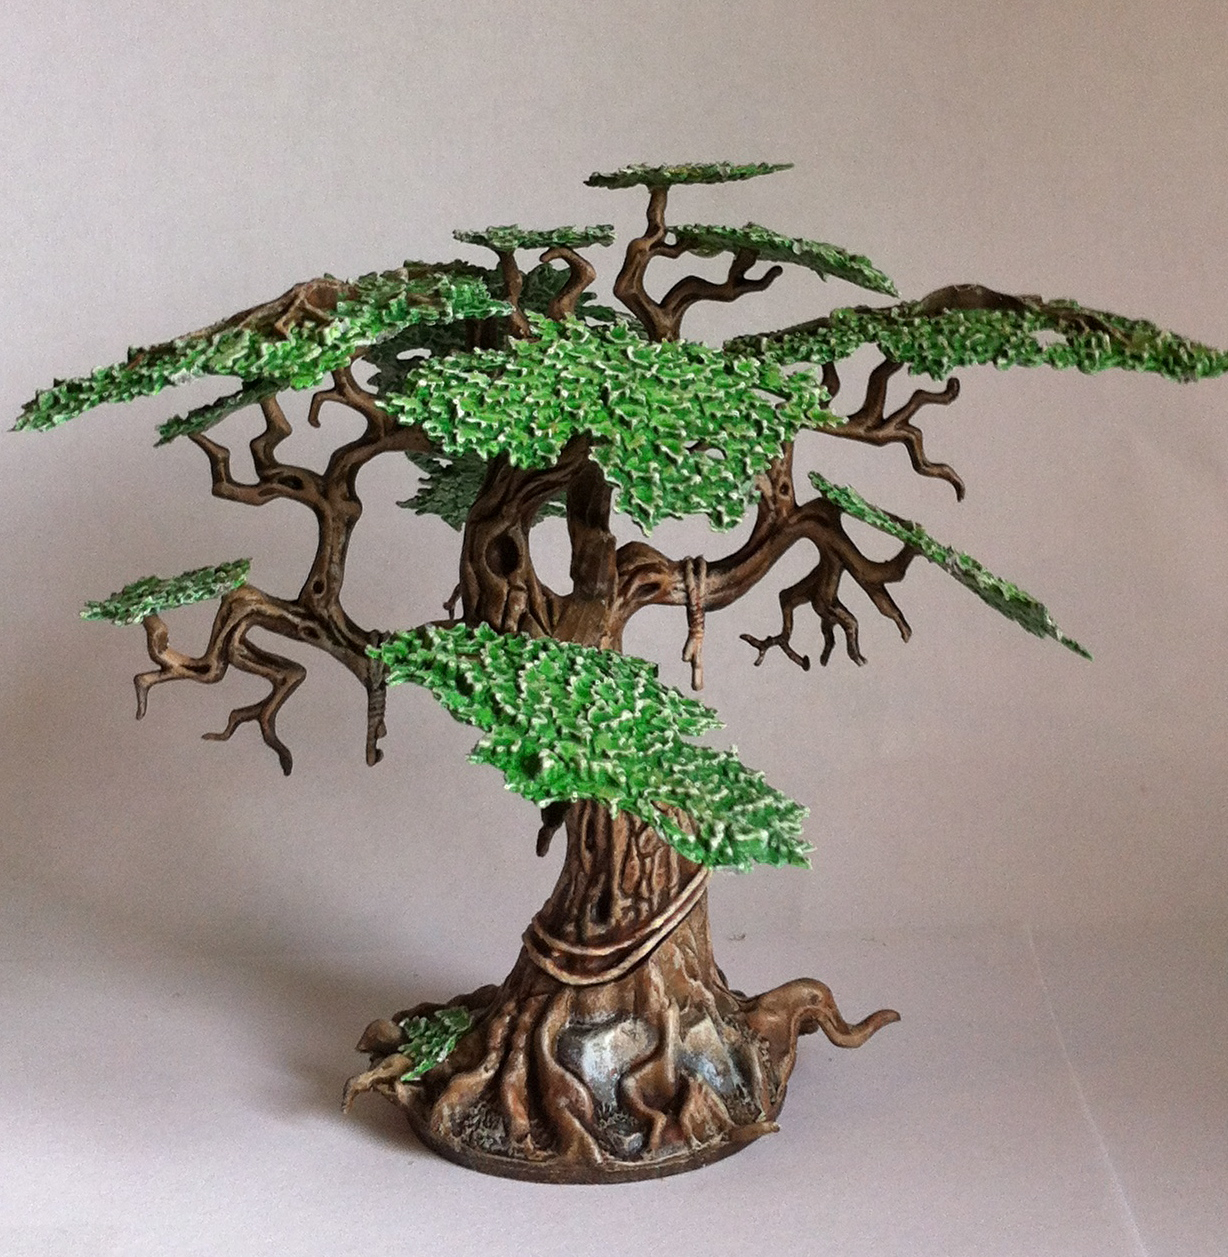 How To Paint Citadel Miniatures Wood Elves Pdf To Jpg - hillmath